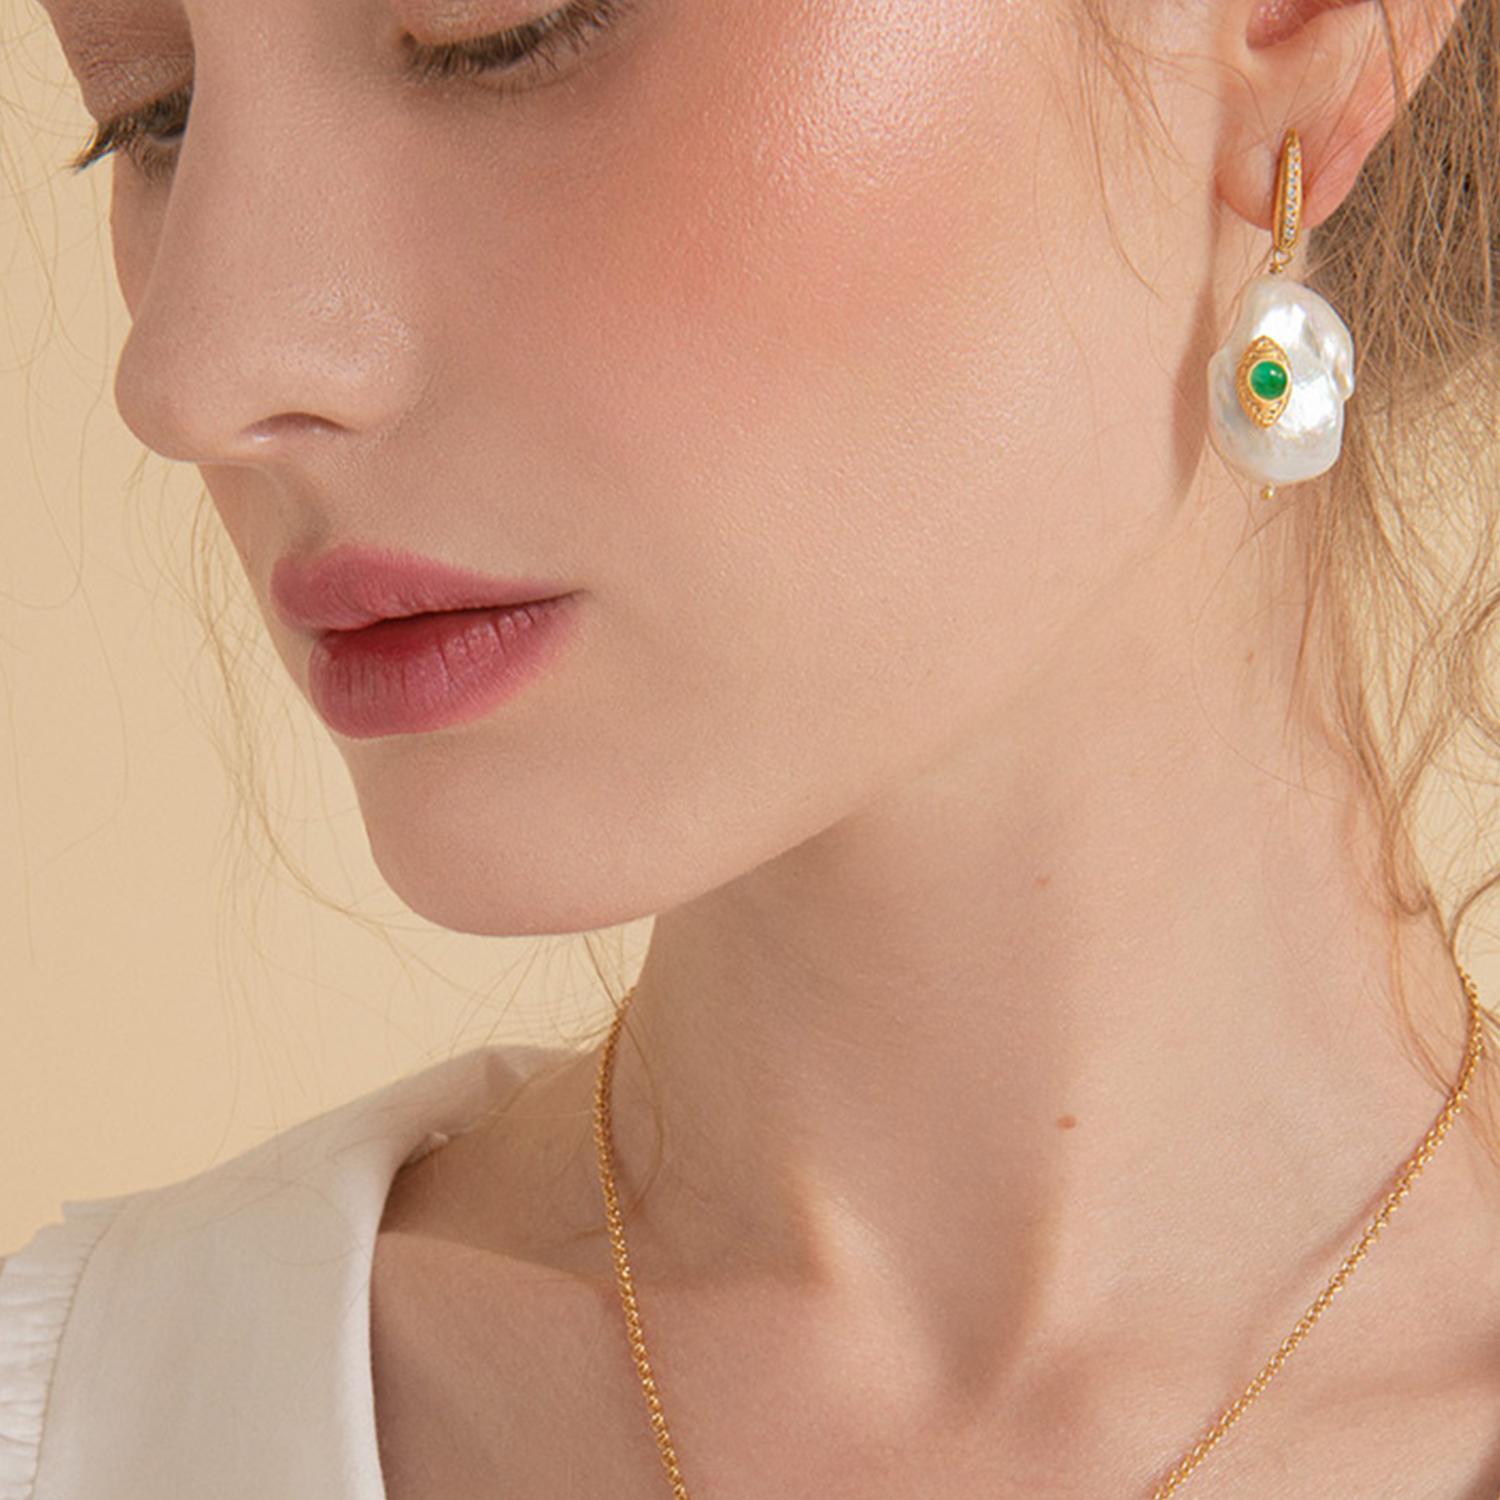 'The Eye' earrings by Vintouch are handcrafted from 18-karat gold-plated silver featuring vibrant green emeralds that are bezel-set in an eye-looking element inspired by Egyptian Eye of Horus, symbolizing protection. The dainty pearl is embellished